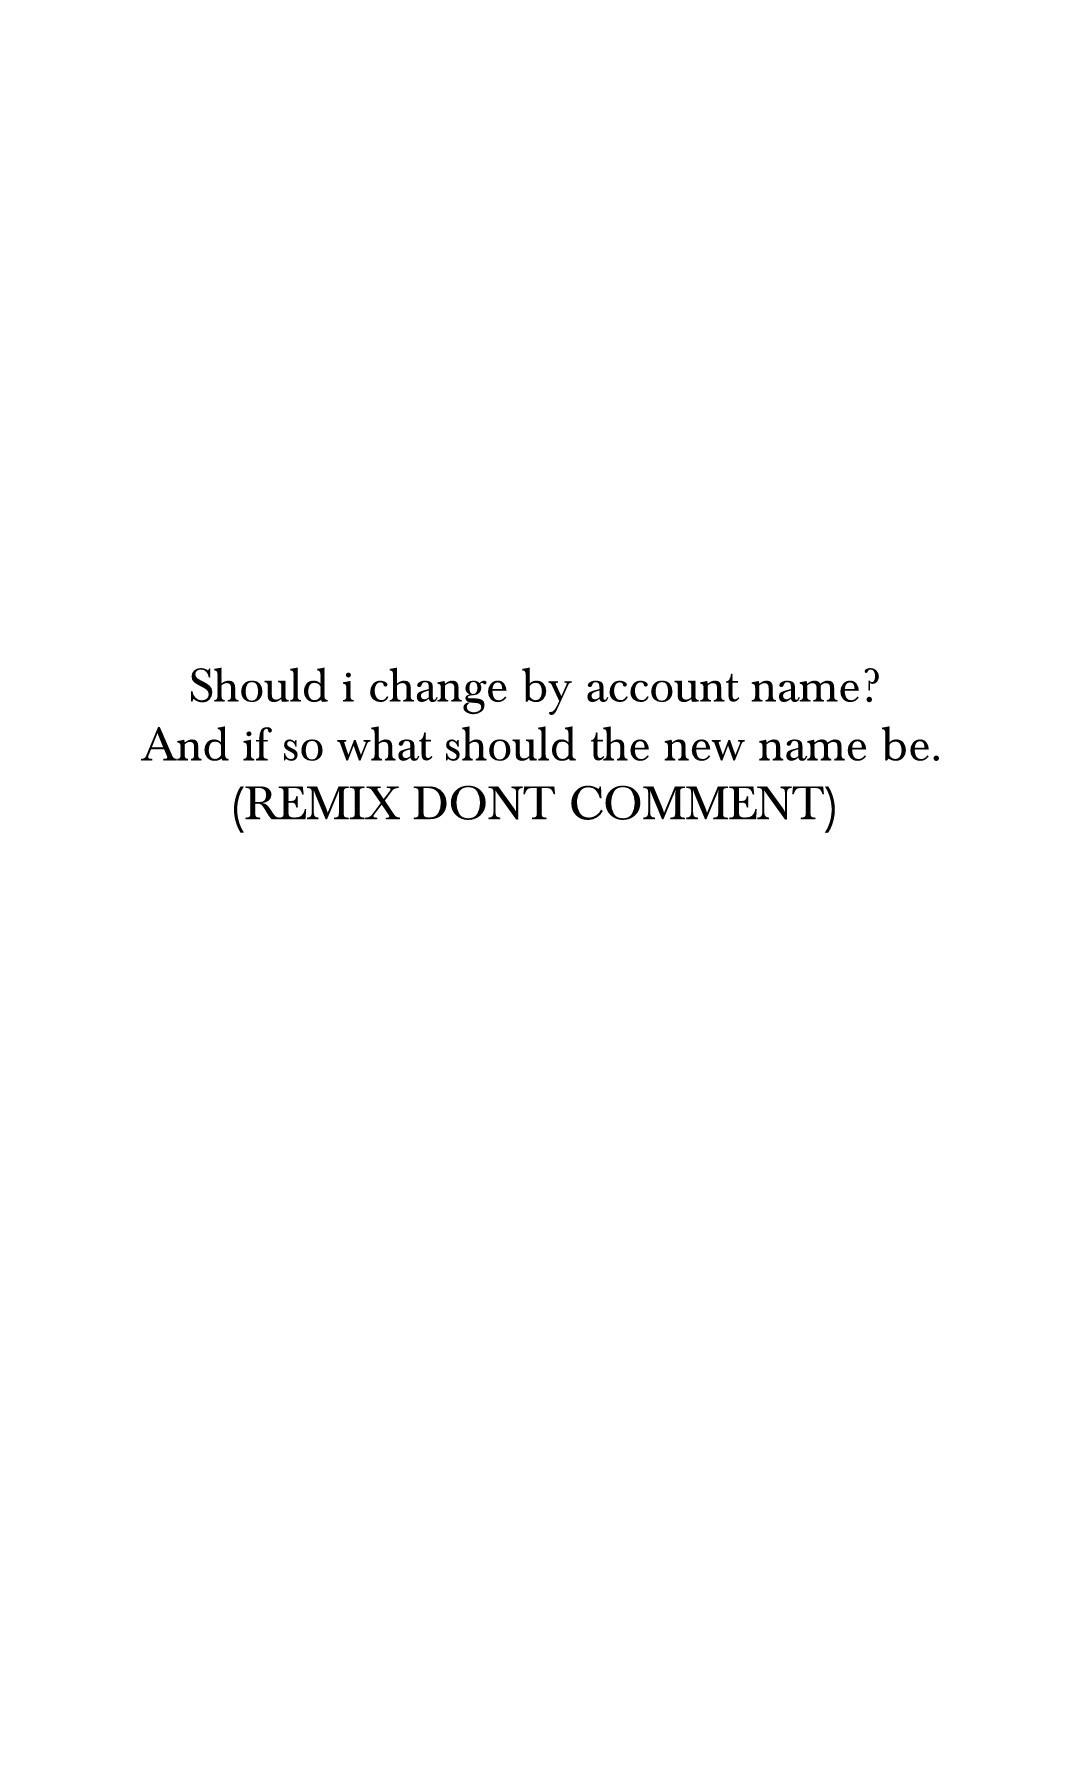 Should i change by account name?
 And if so what should the new name be.
(REMIX DONT COMMENT)